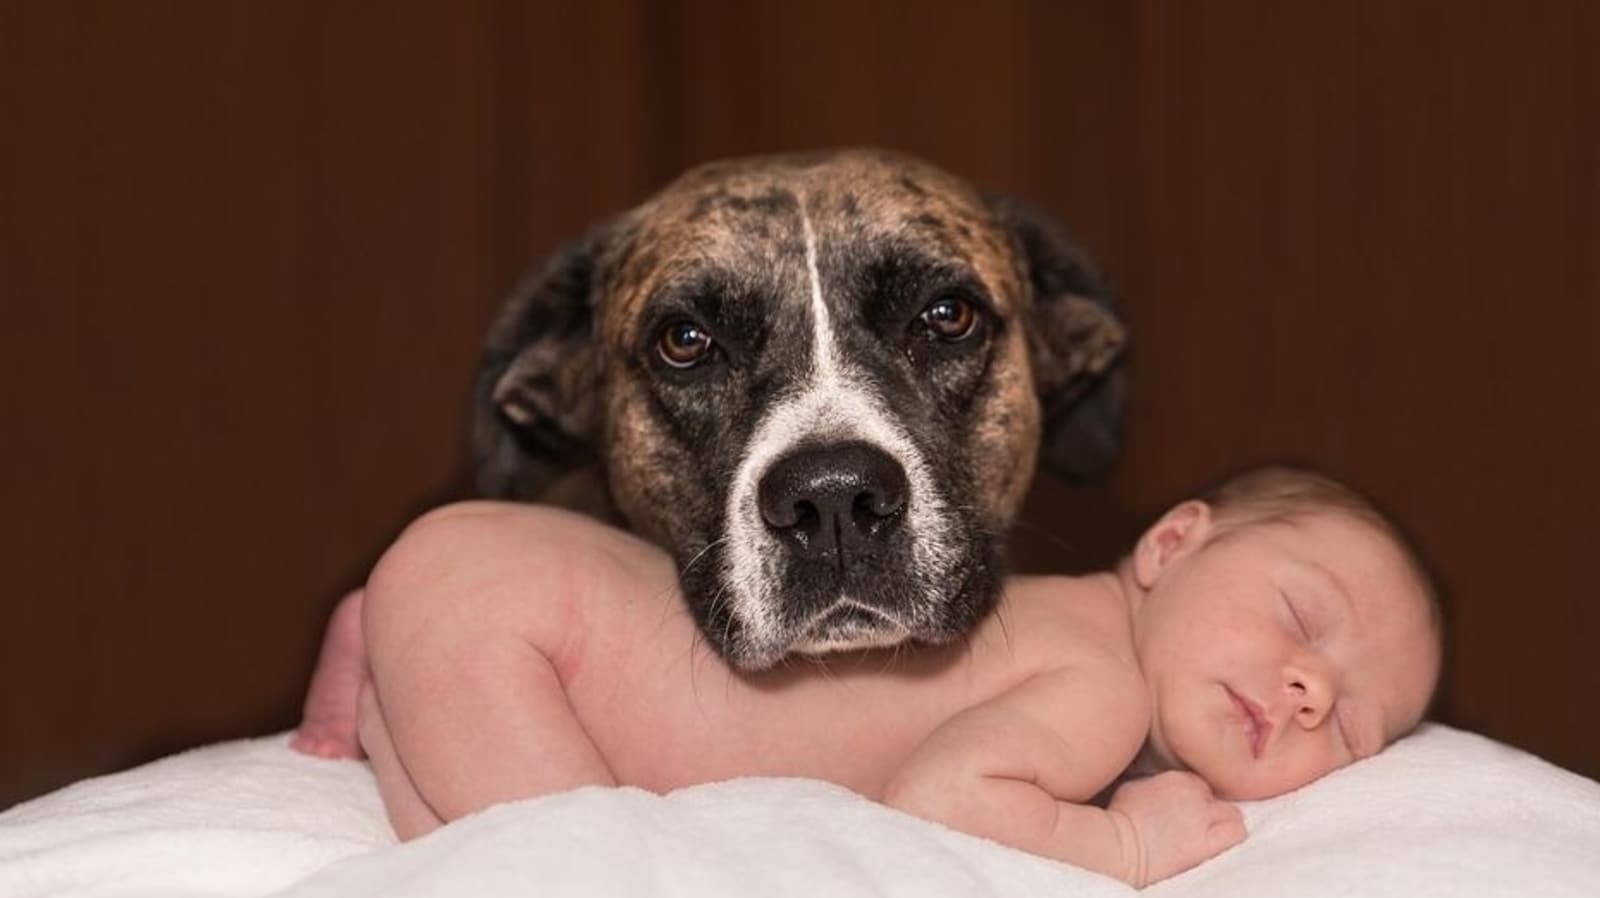 Is your baby safe around pets? Expert tips to build a bond between ...